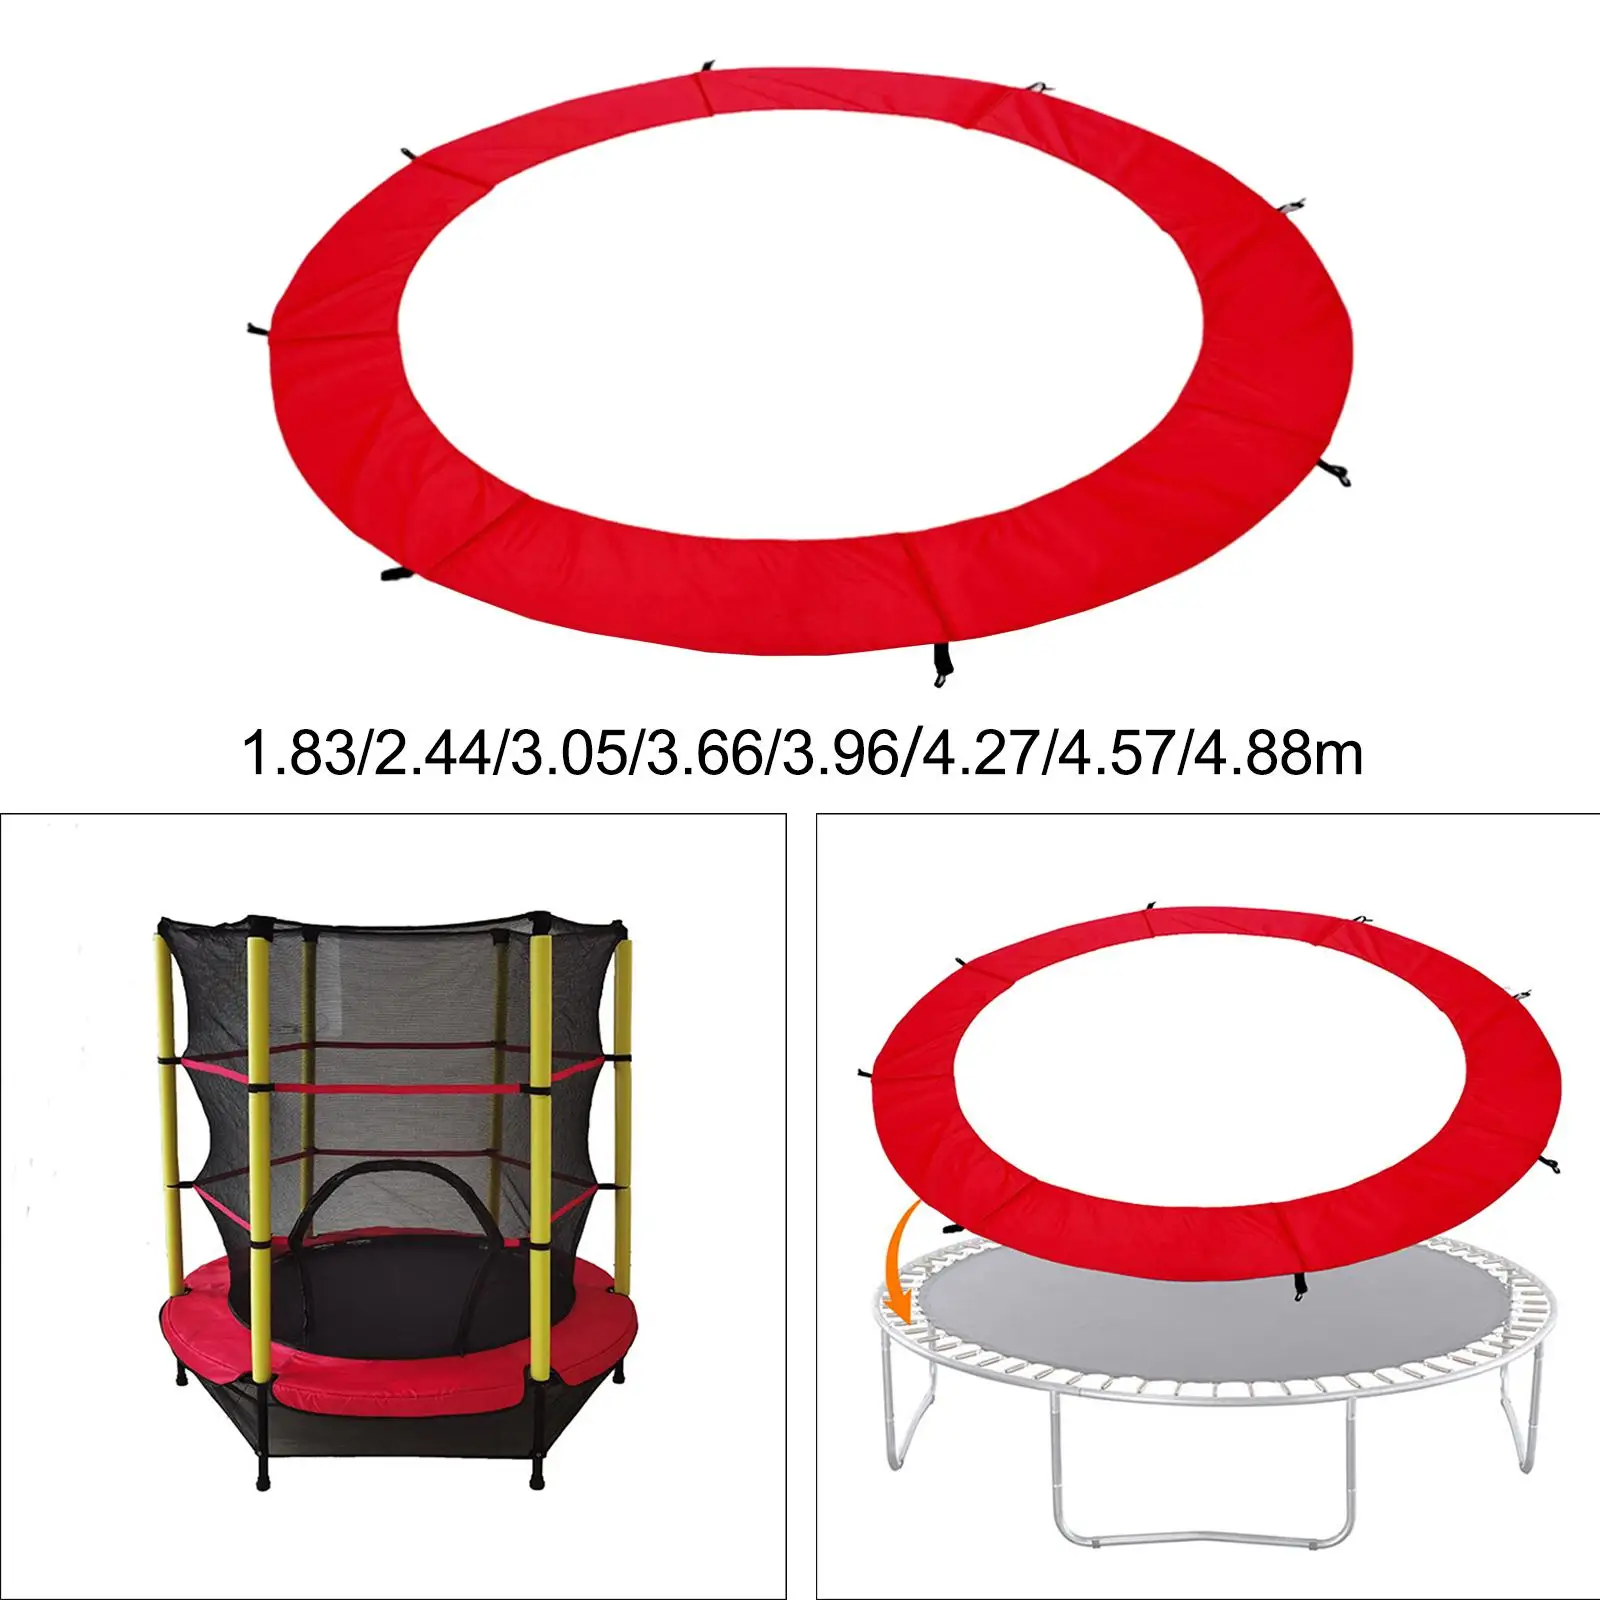 Trampoline Pad Cover Trampoline Parts Waterproof Protective Replacement Round Frames Surround Guard Jumping Bed Cover Edge Guard